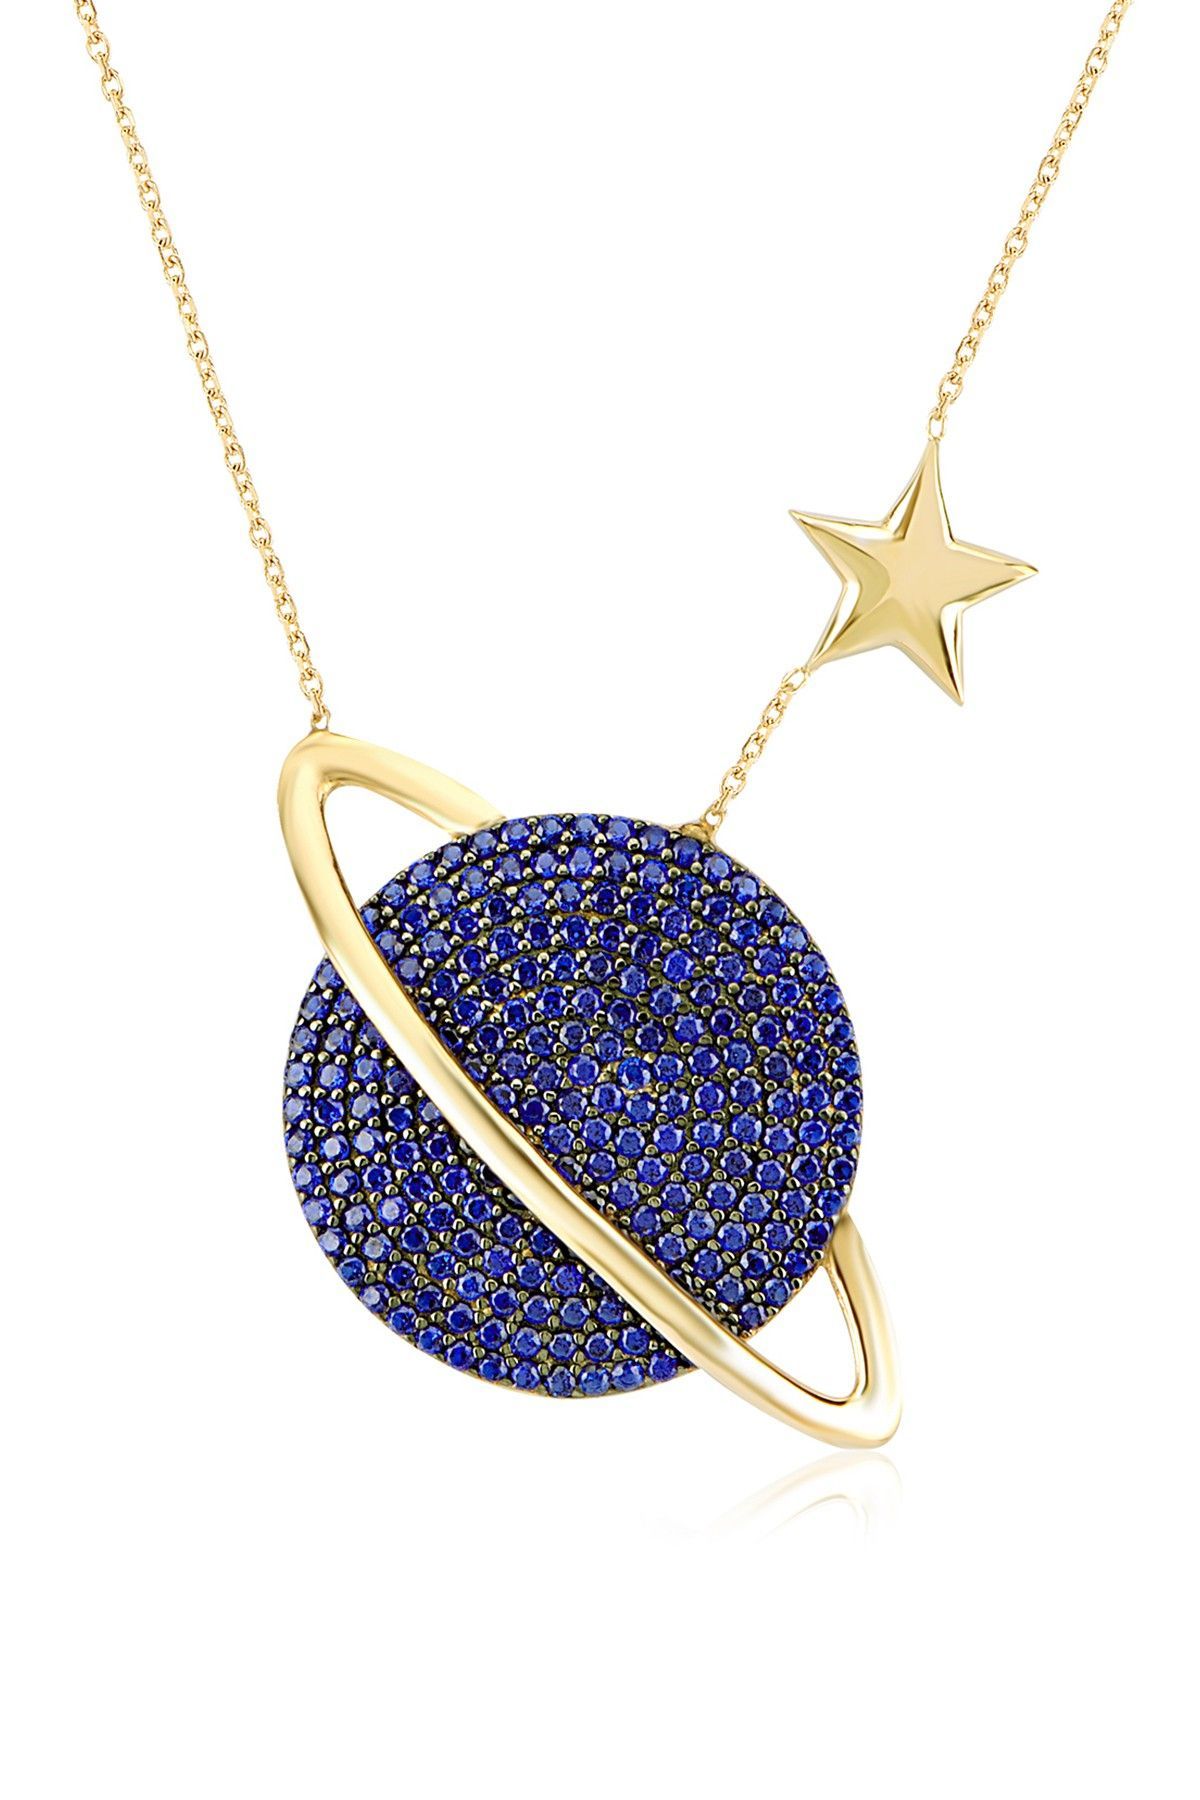 Gold Vermeil Blue Cz Planet & Star Pendant Necklace | Jewelry In With Regard To Most Popular Pavé Star Locket Element Necklaces (View 7 of 25)